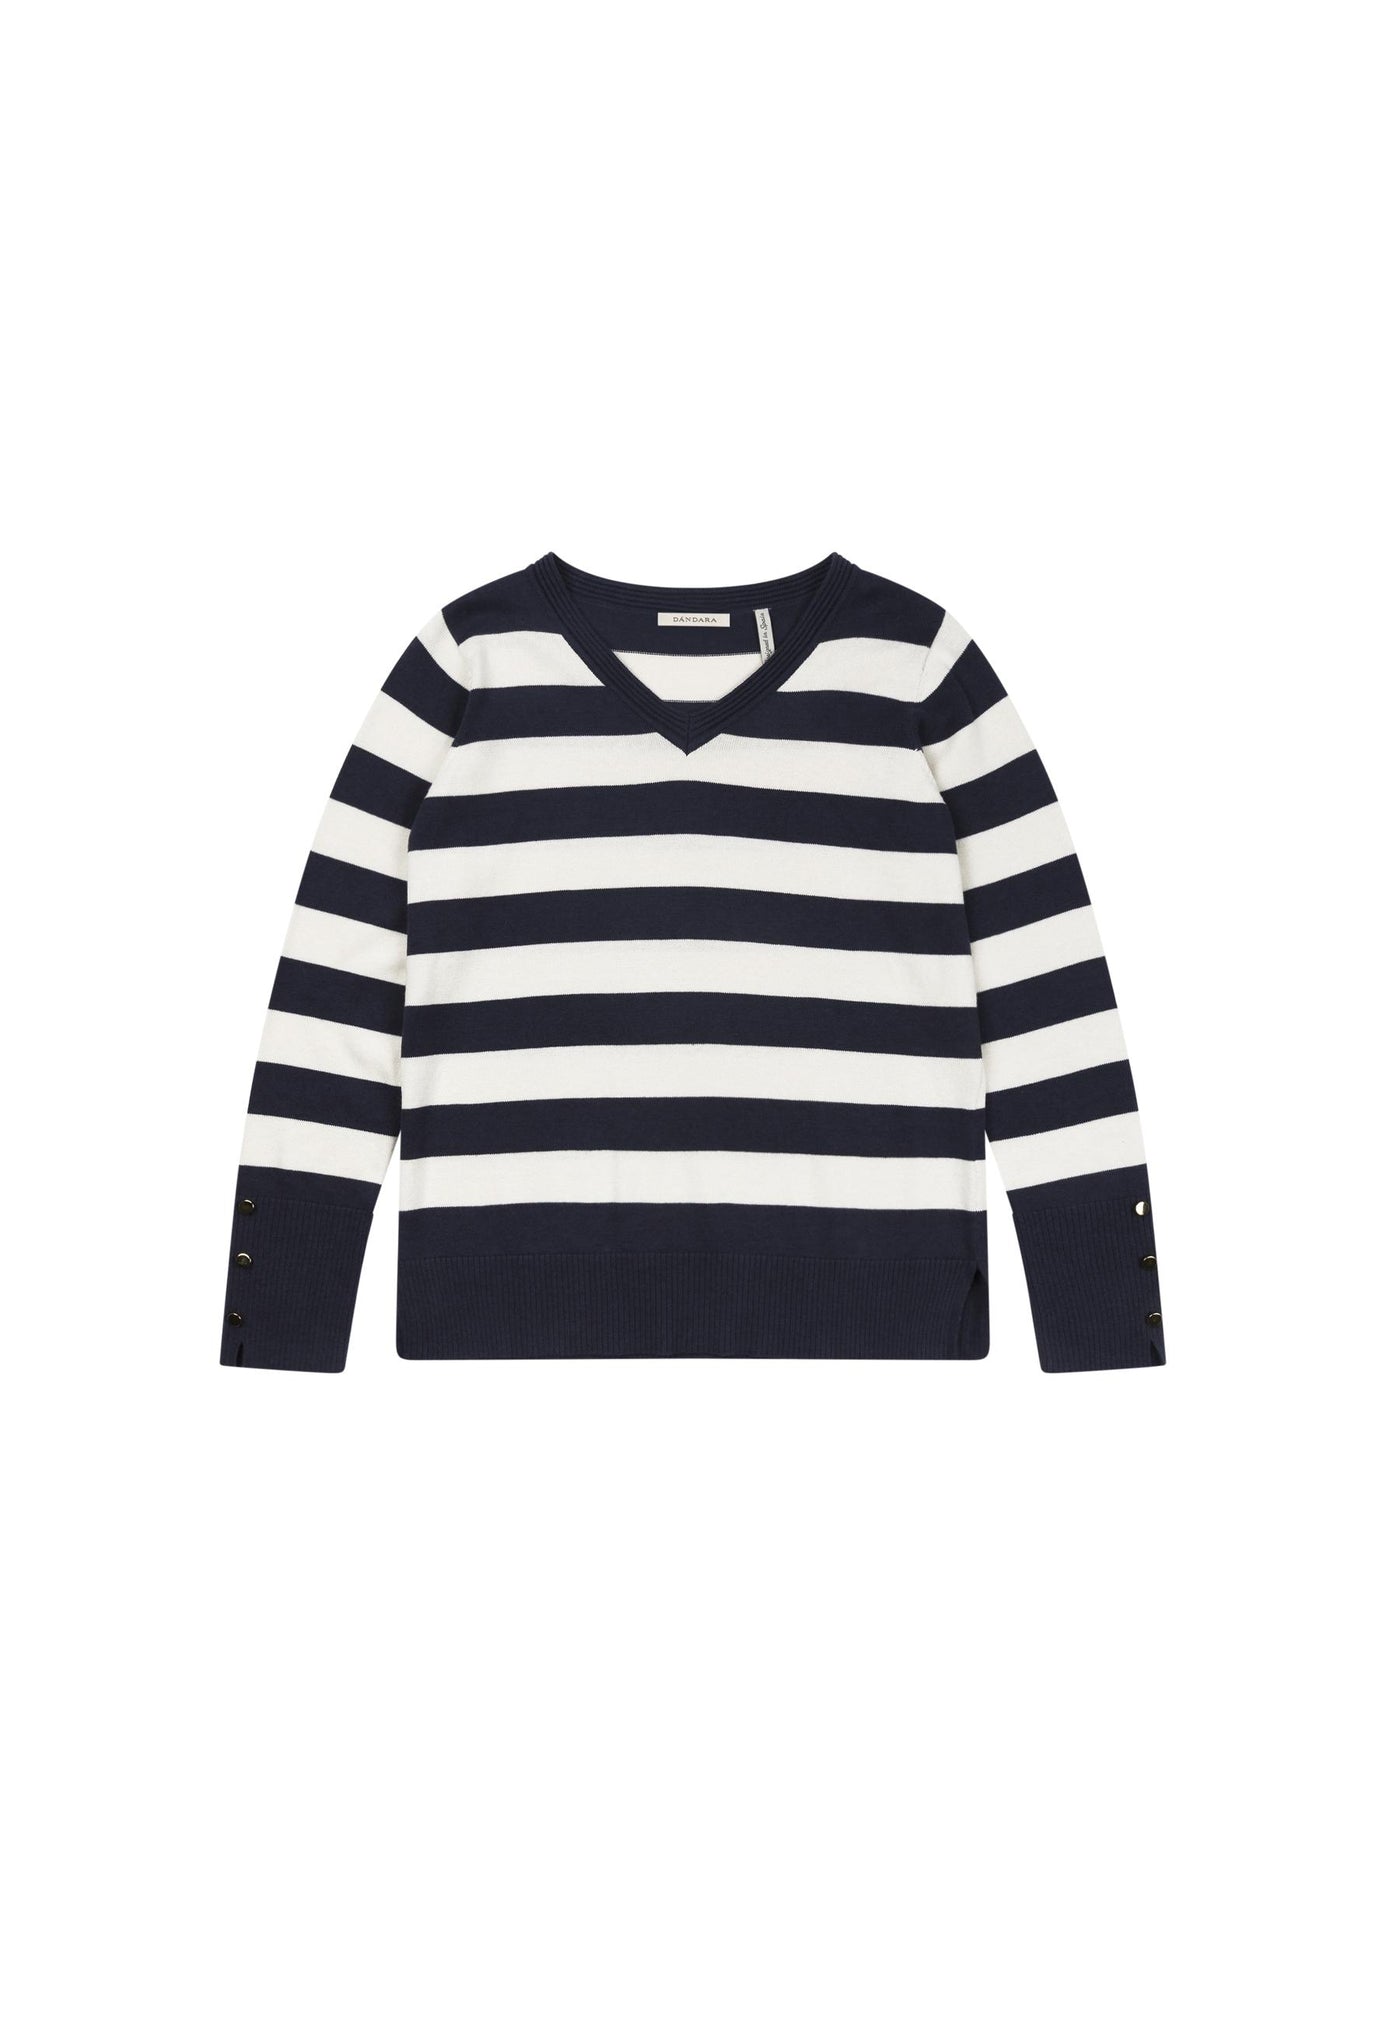 Navy and Cream Striped V-Neck Jumper with Gold Button Detail